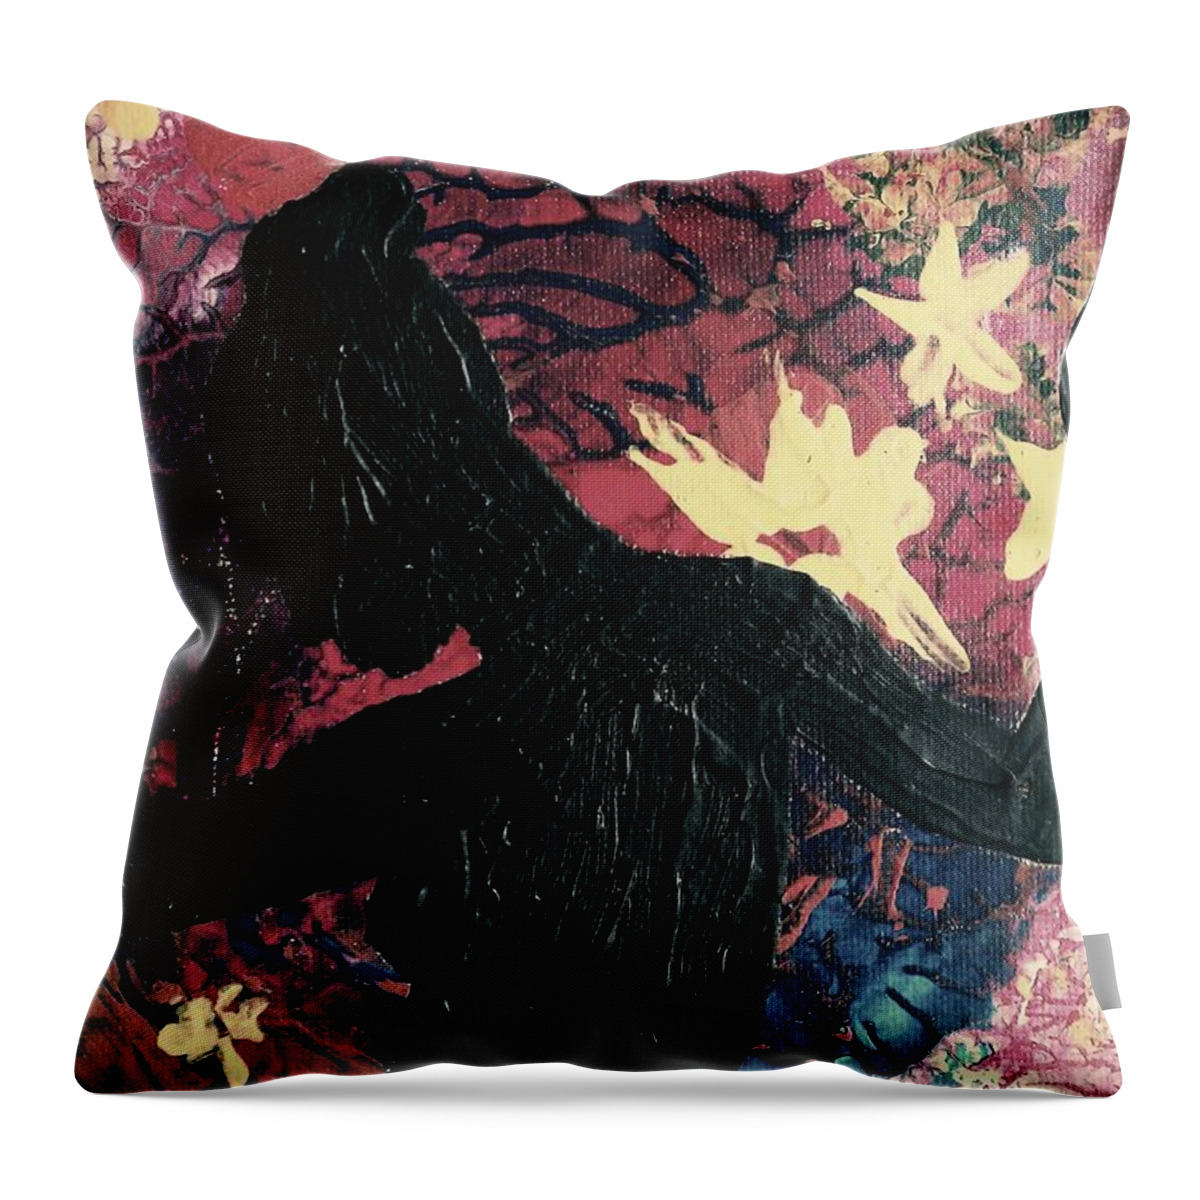 Silhouette Throw Pillow featuring the painting Cinnamon by Jacqueline McReynolds